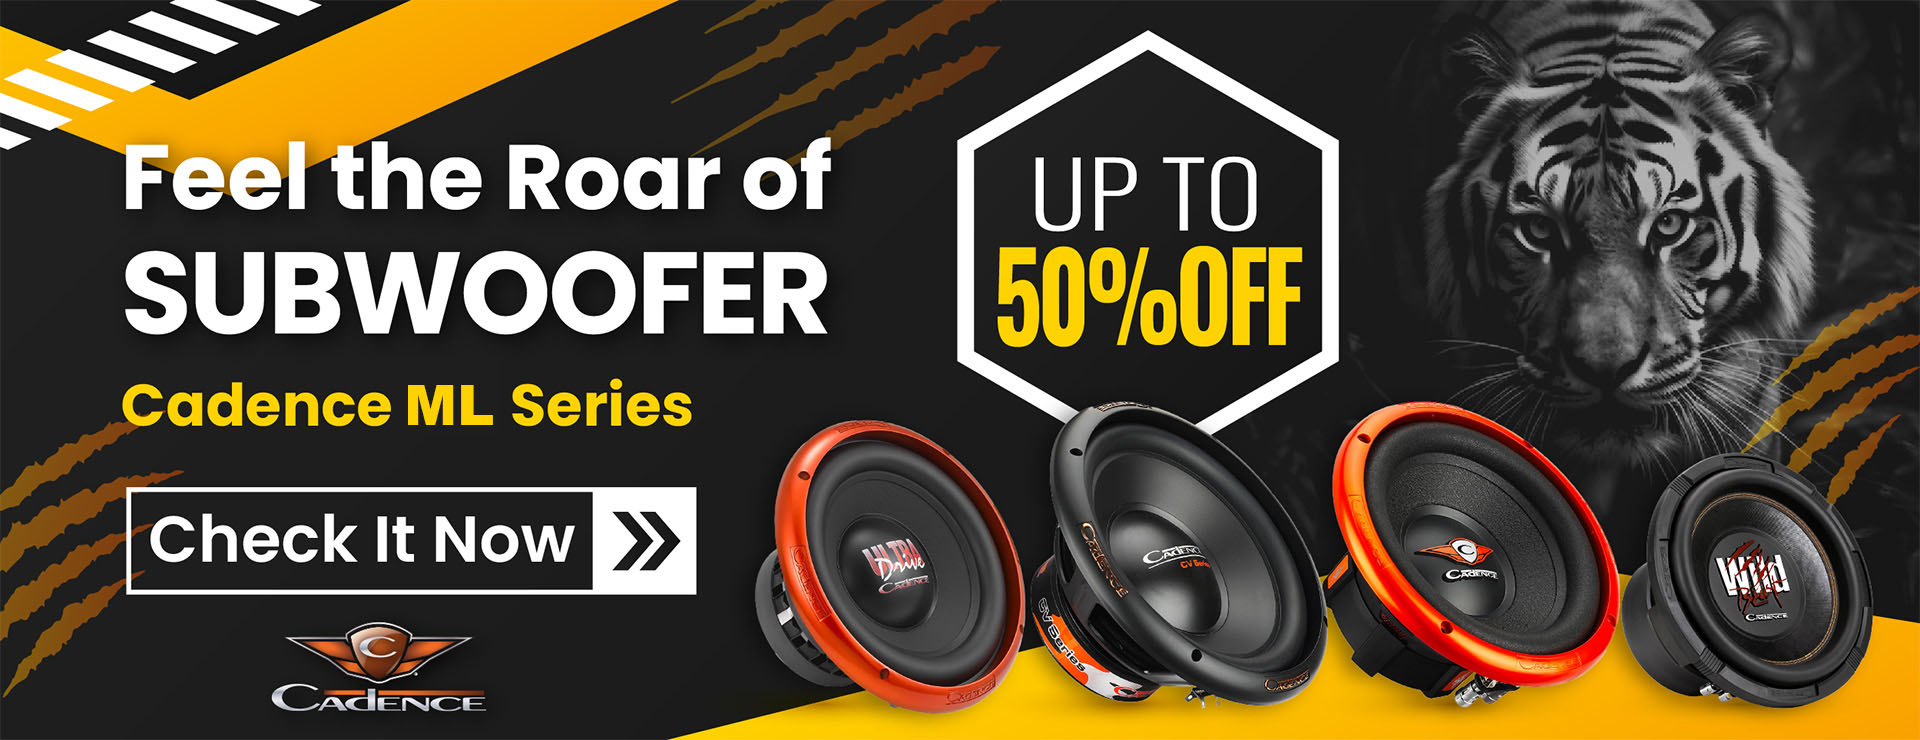 Fell the Roar of Subwoofer Cadence ML Series Up to 50%off